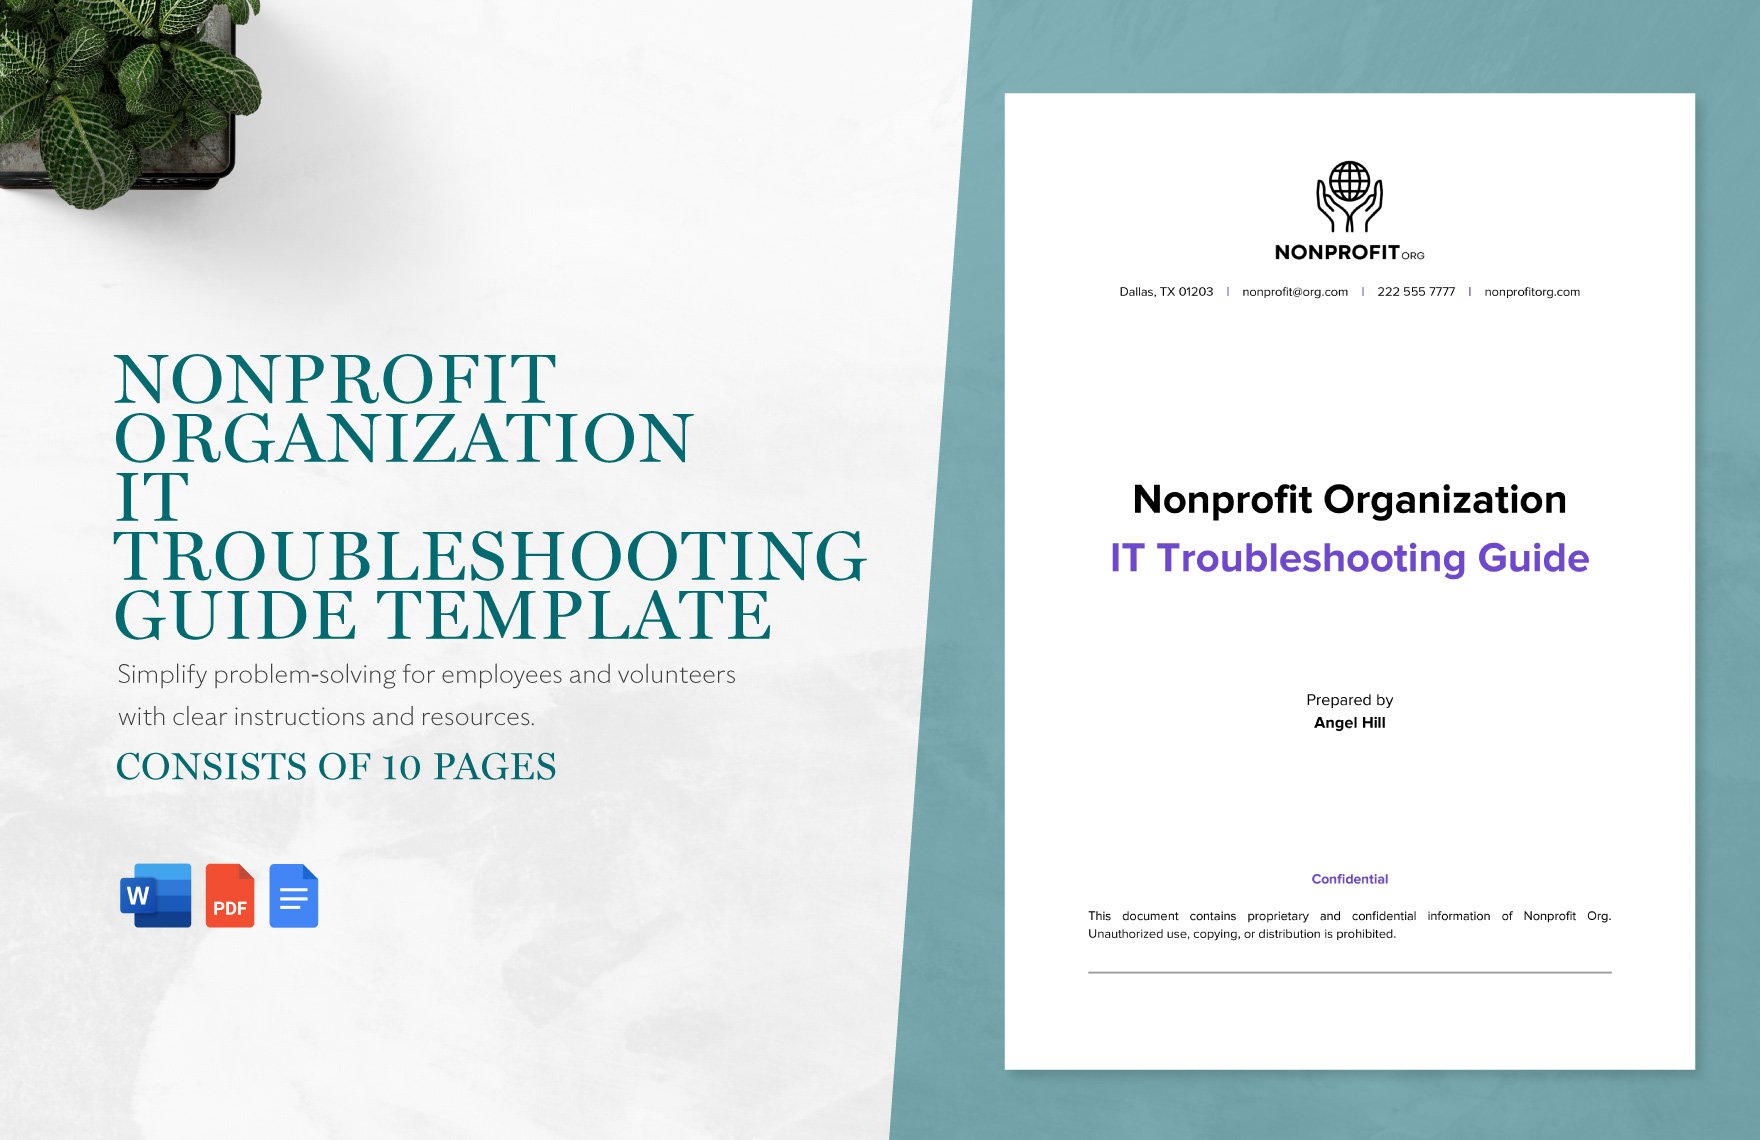 Nonprofit Organization IT Troubleshooting Guide Template in Word, Google Docs, PDF